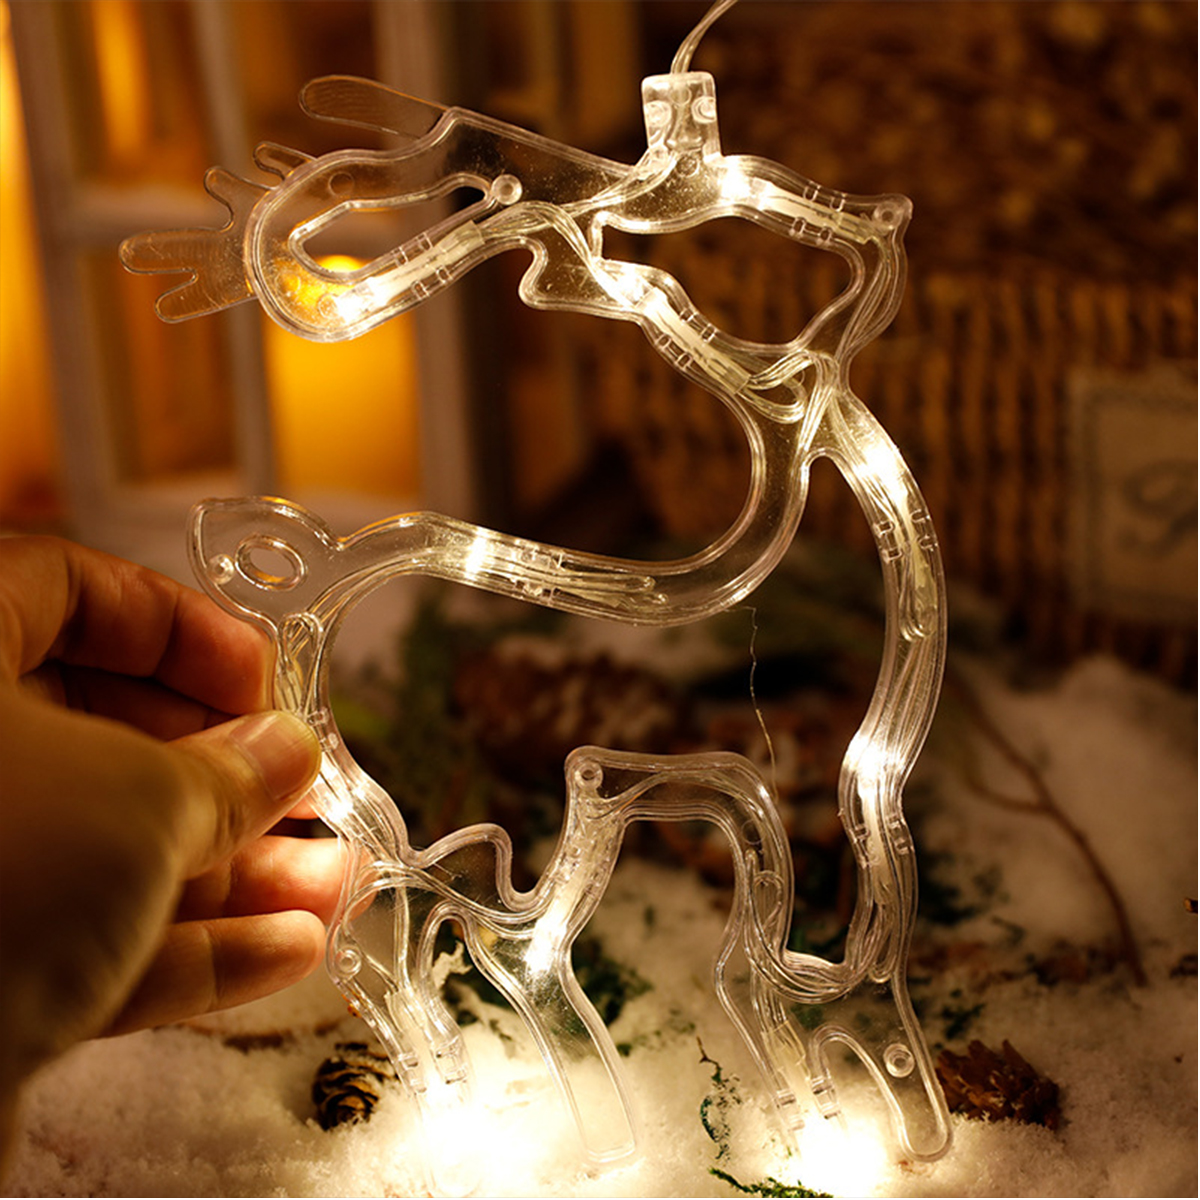 LED-Christmas-Suction-Cup-Night-Light-Ornament-Wall-Window-Hanging-Lamp-Home-Decor-1753842-8